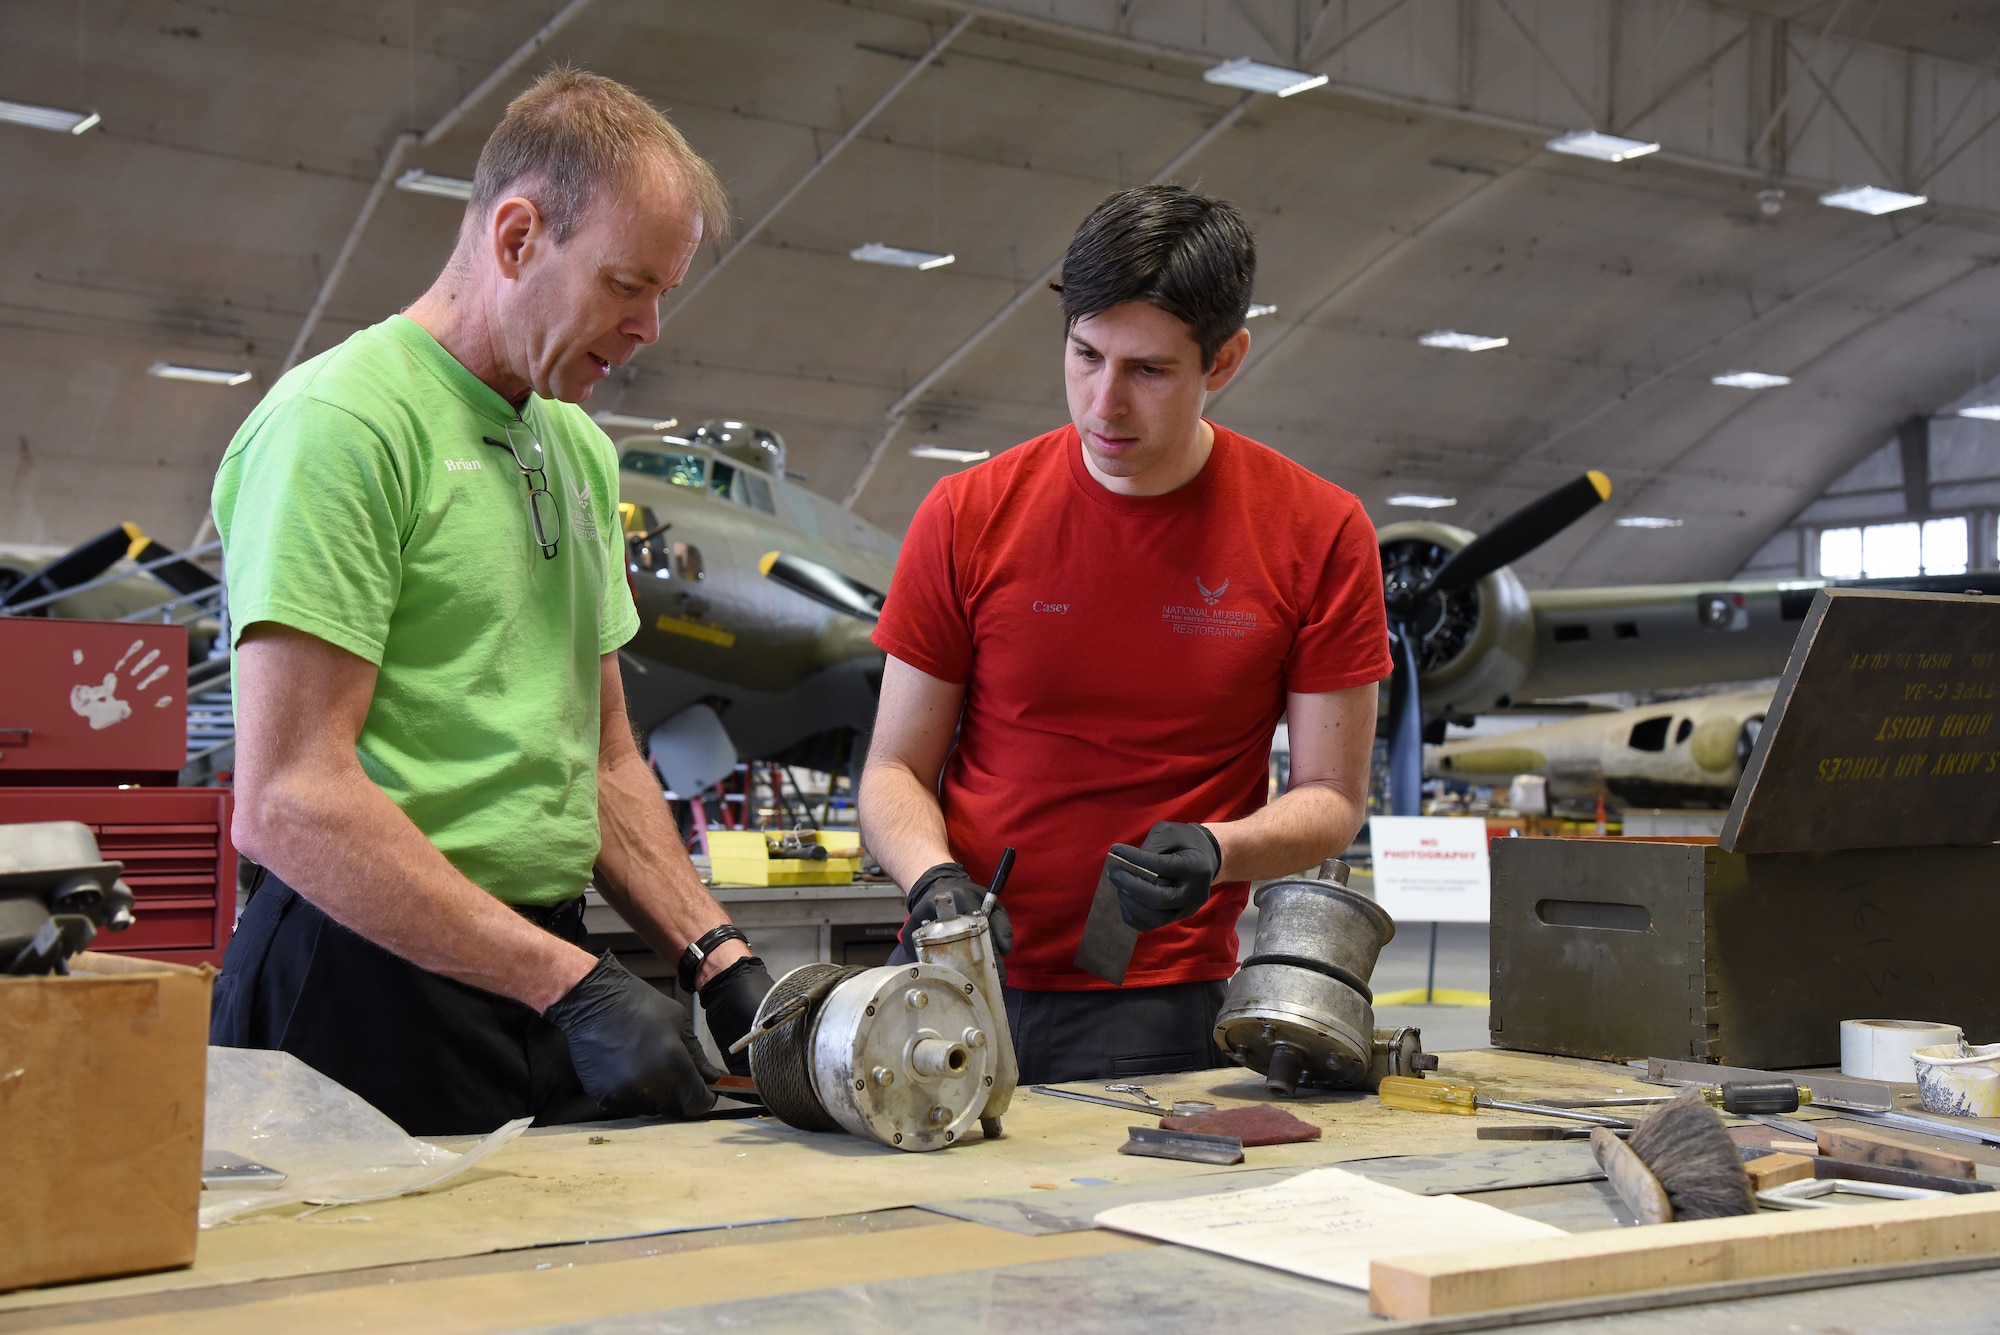 (03/07/2018) -- Museum restoration specialists Brian Lindamood and Casey Simmons working on bomb bay parts for the Boeing B-17F Memphis Belle. Plans call for the aircraft to be placed on permanent public display in the WWII Gallery here at the National Museum of the U.S. Air Force on May 17, 2018. (U.S. Air Force photo by Ken LaRock)